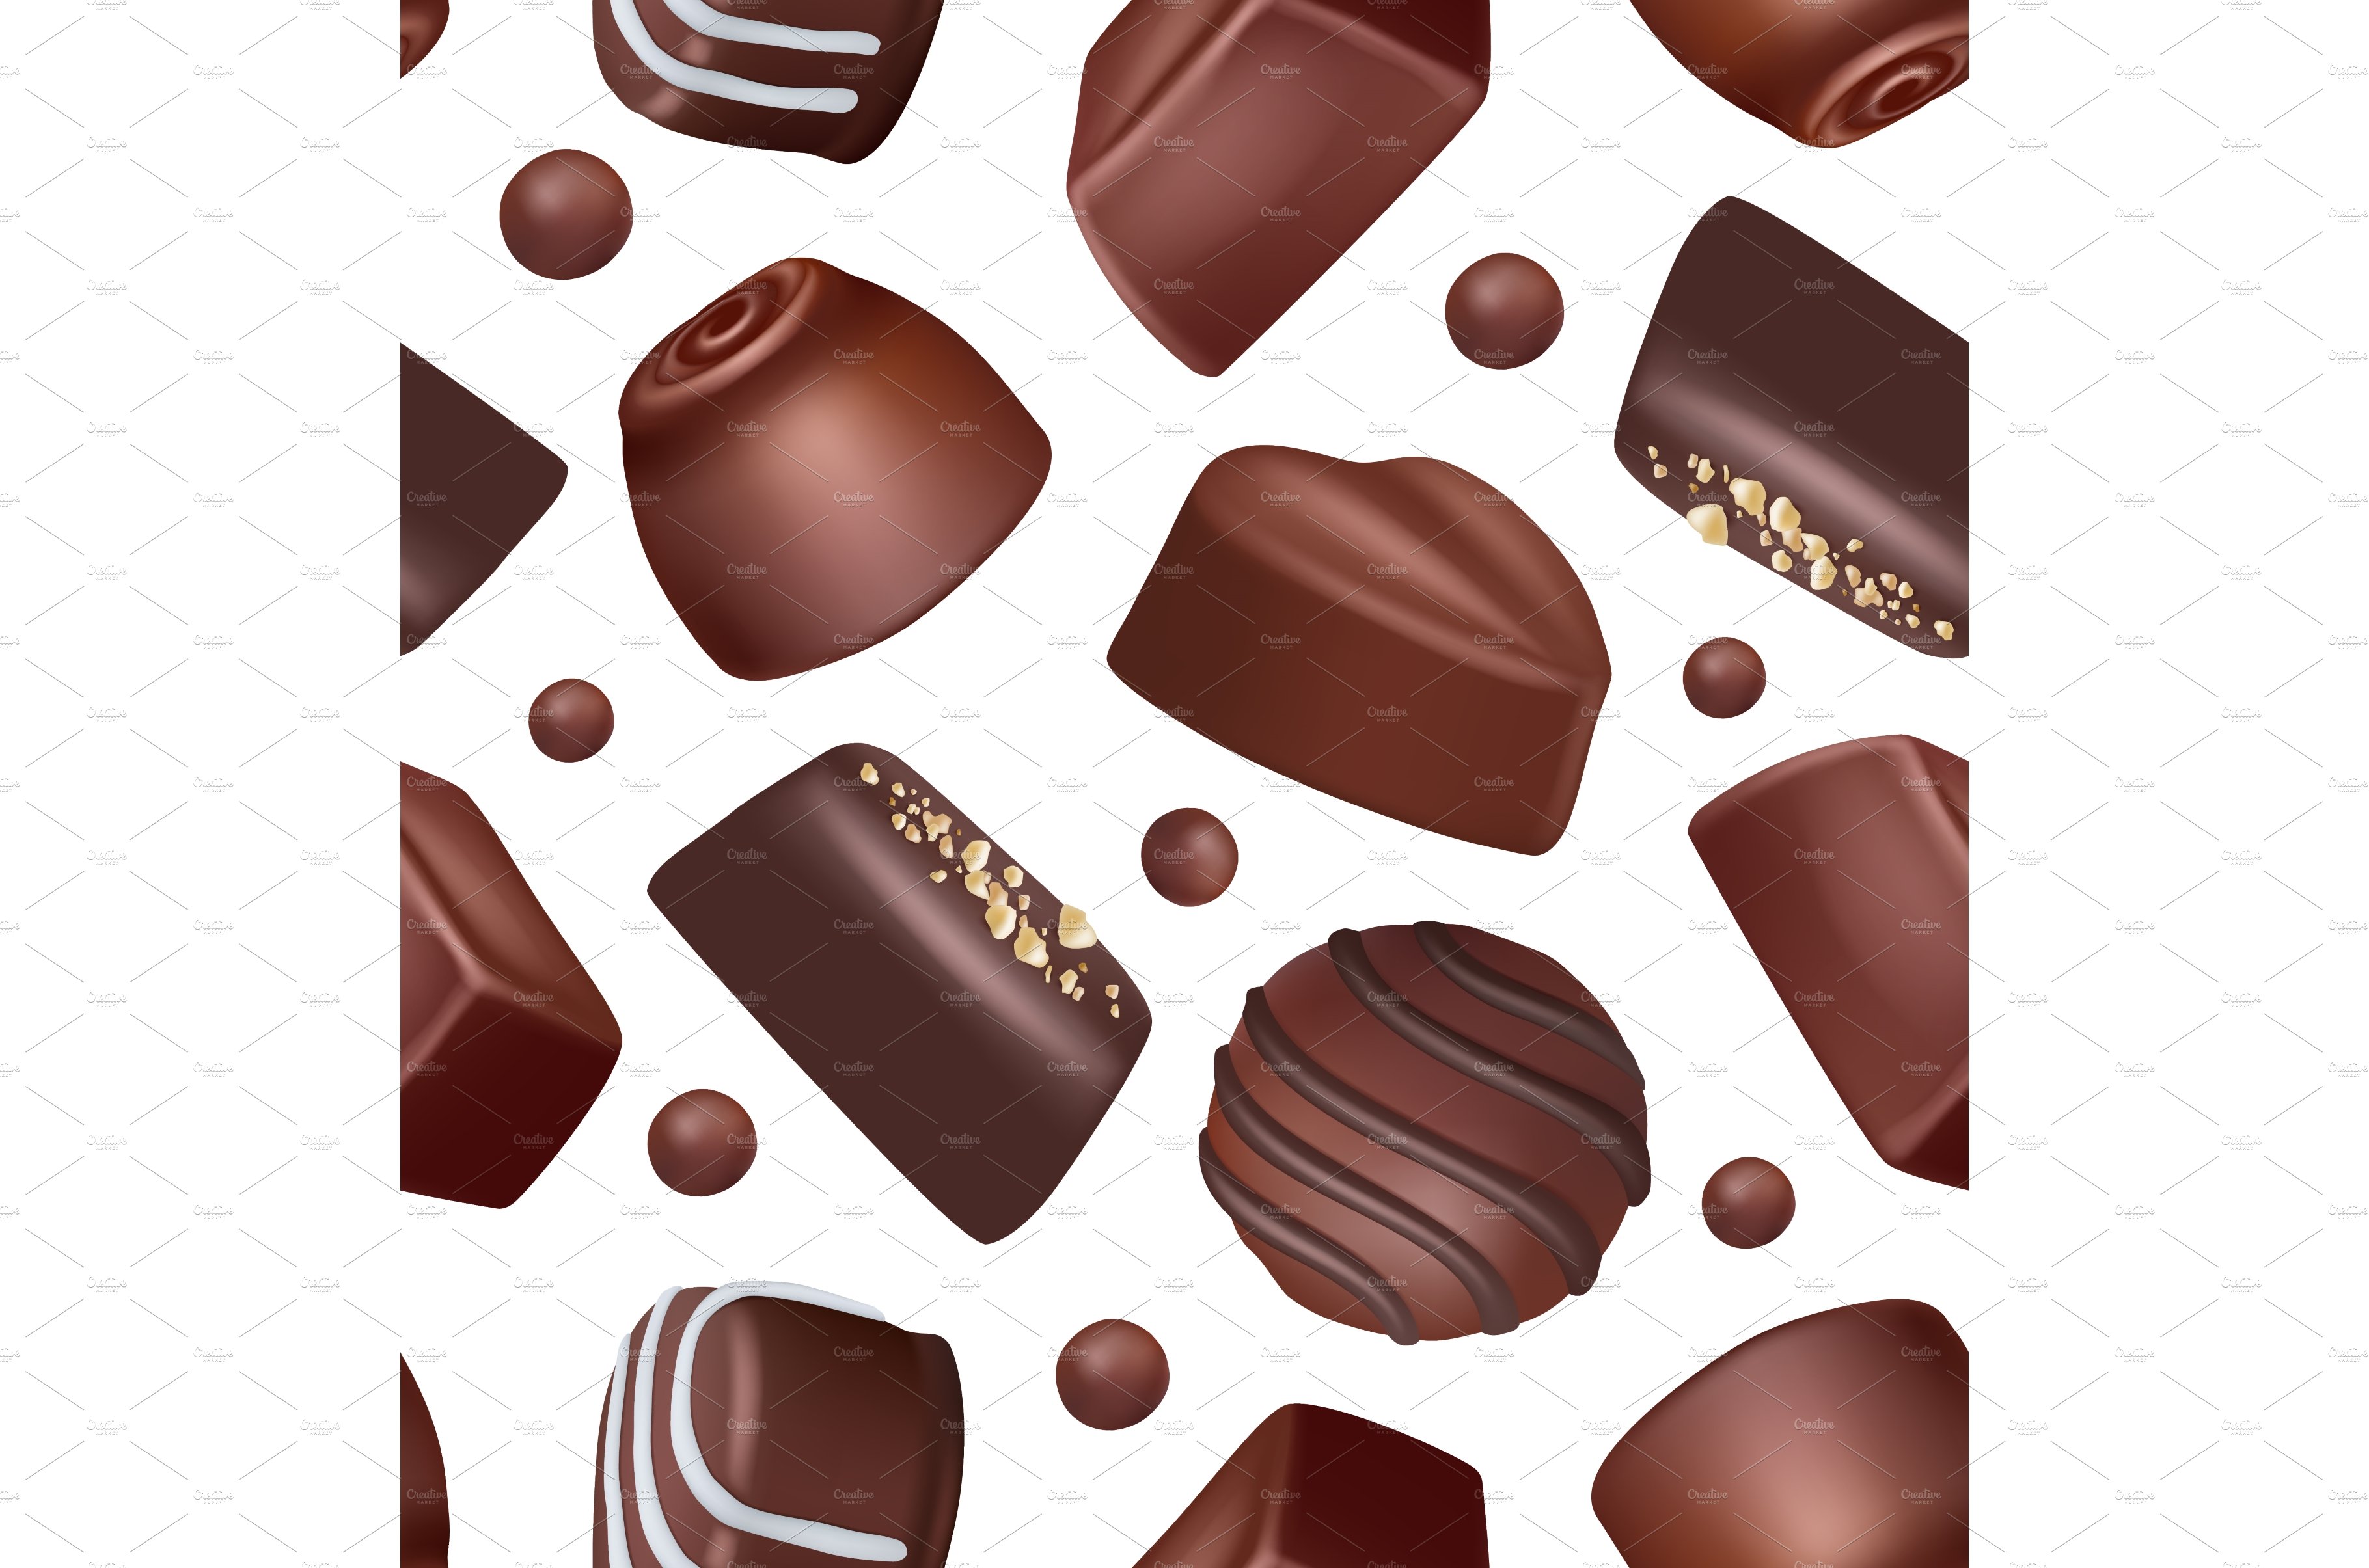 Sweets pattern. Chocolate dessert cover image.